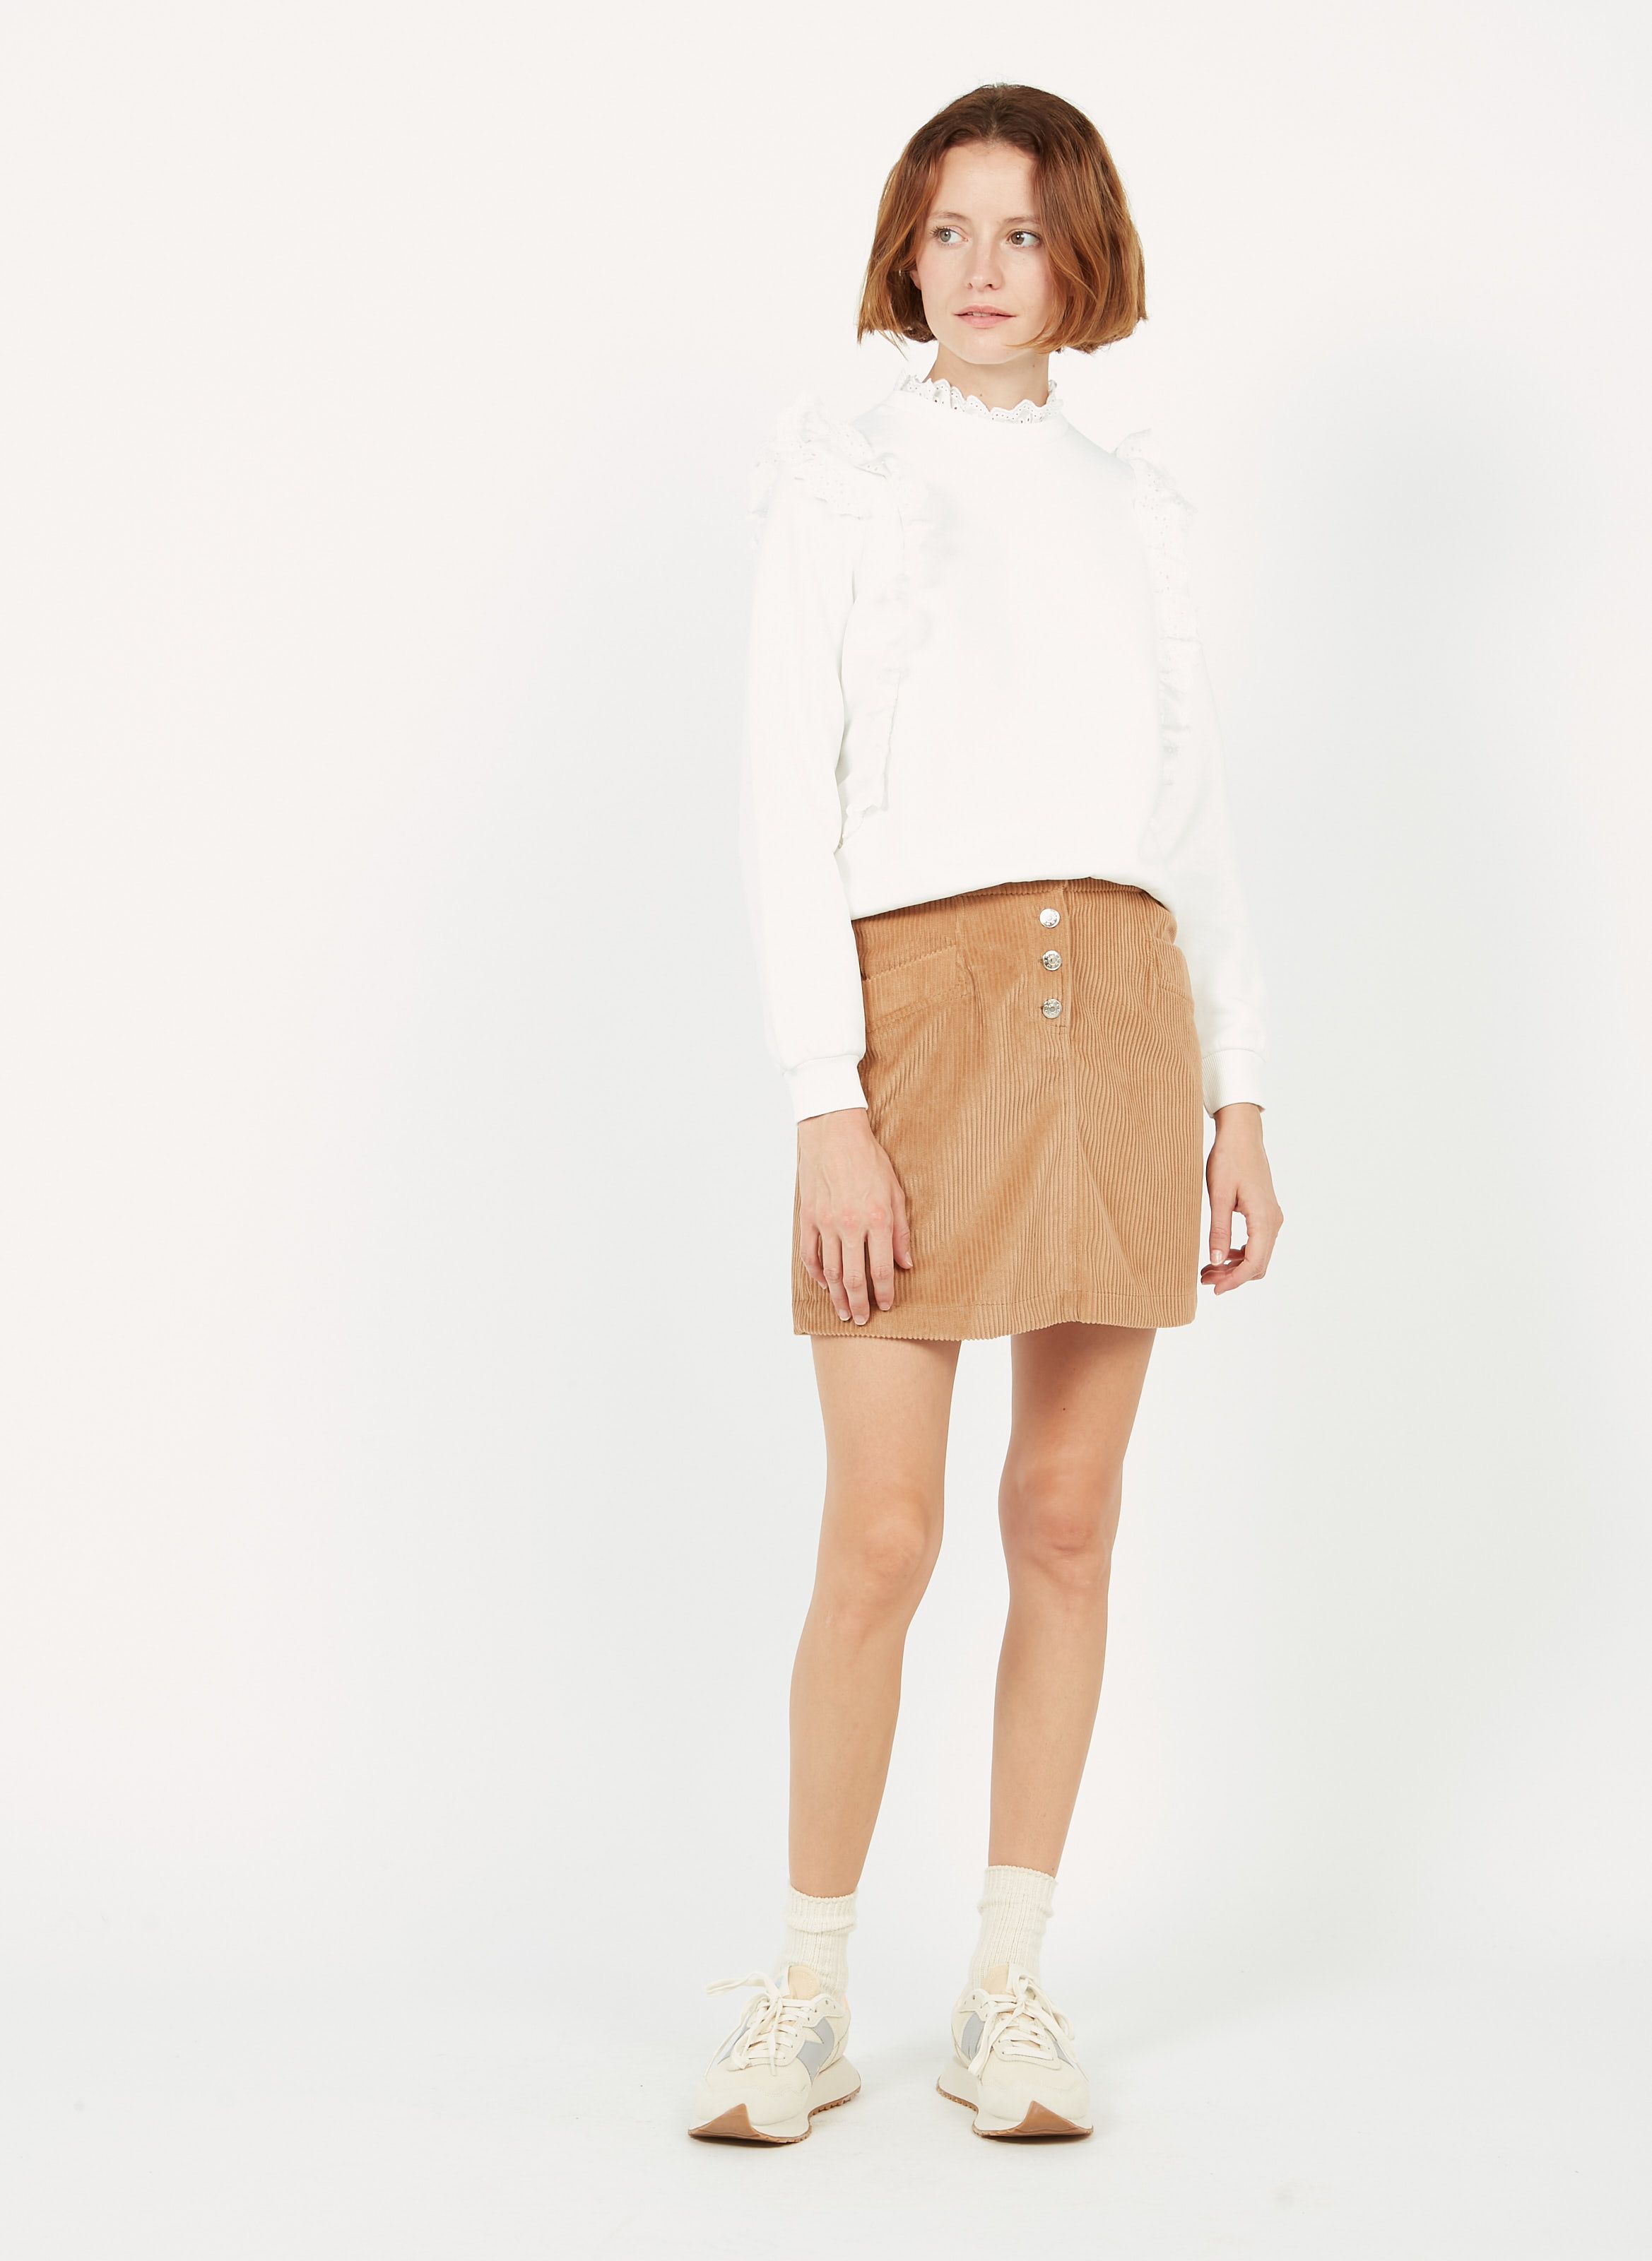 corduroy skirt with sweater